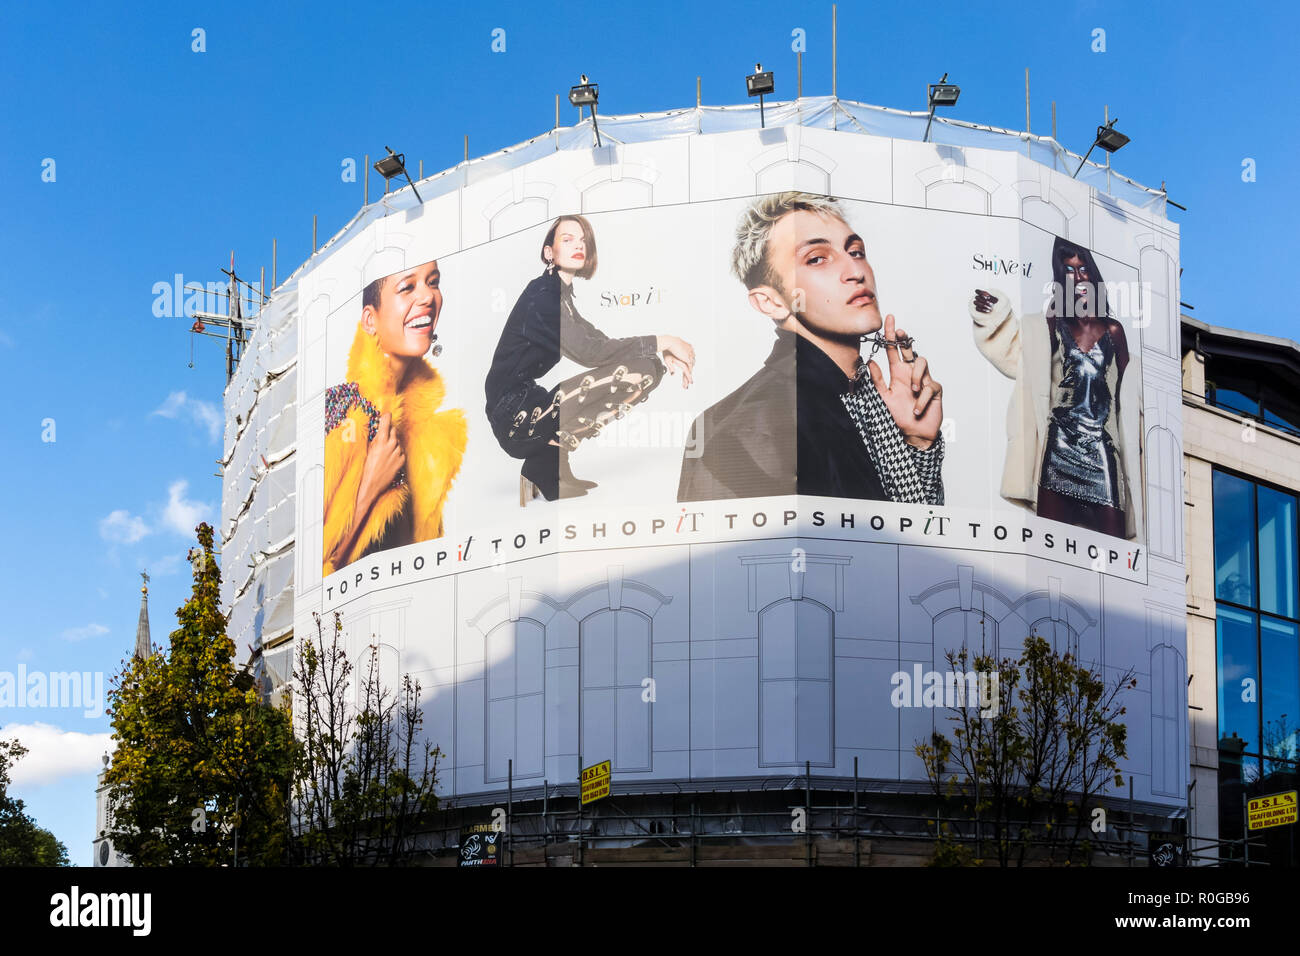 Large Topshop advertisement on building in Clerkenwell, London. Stock Photo